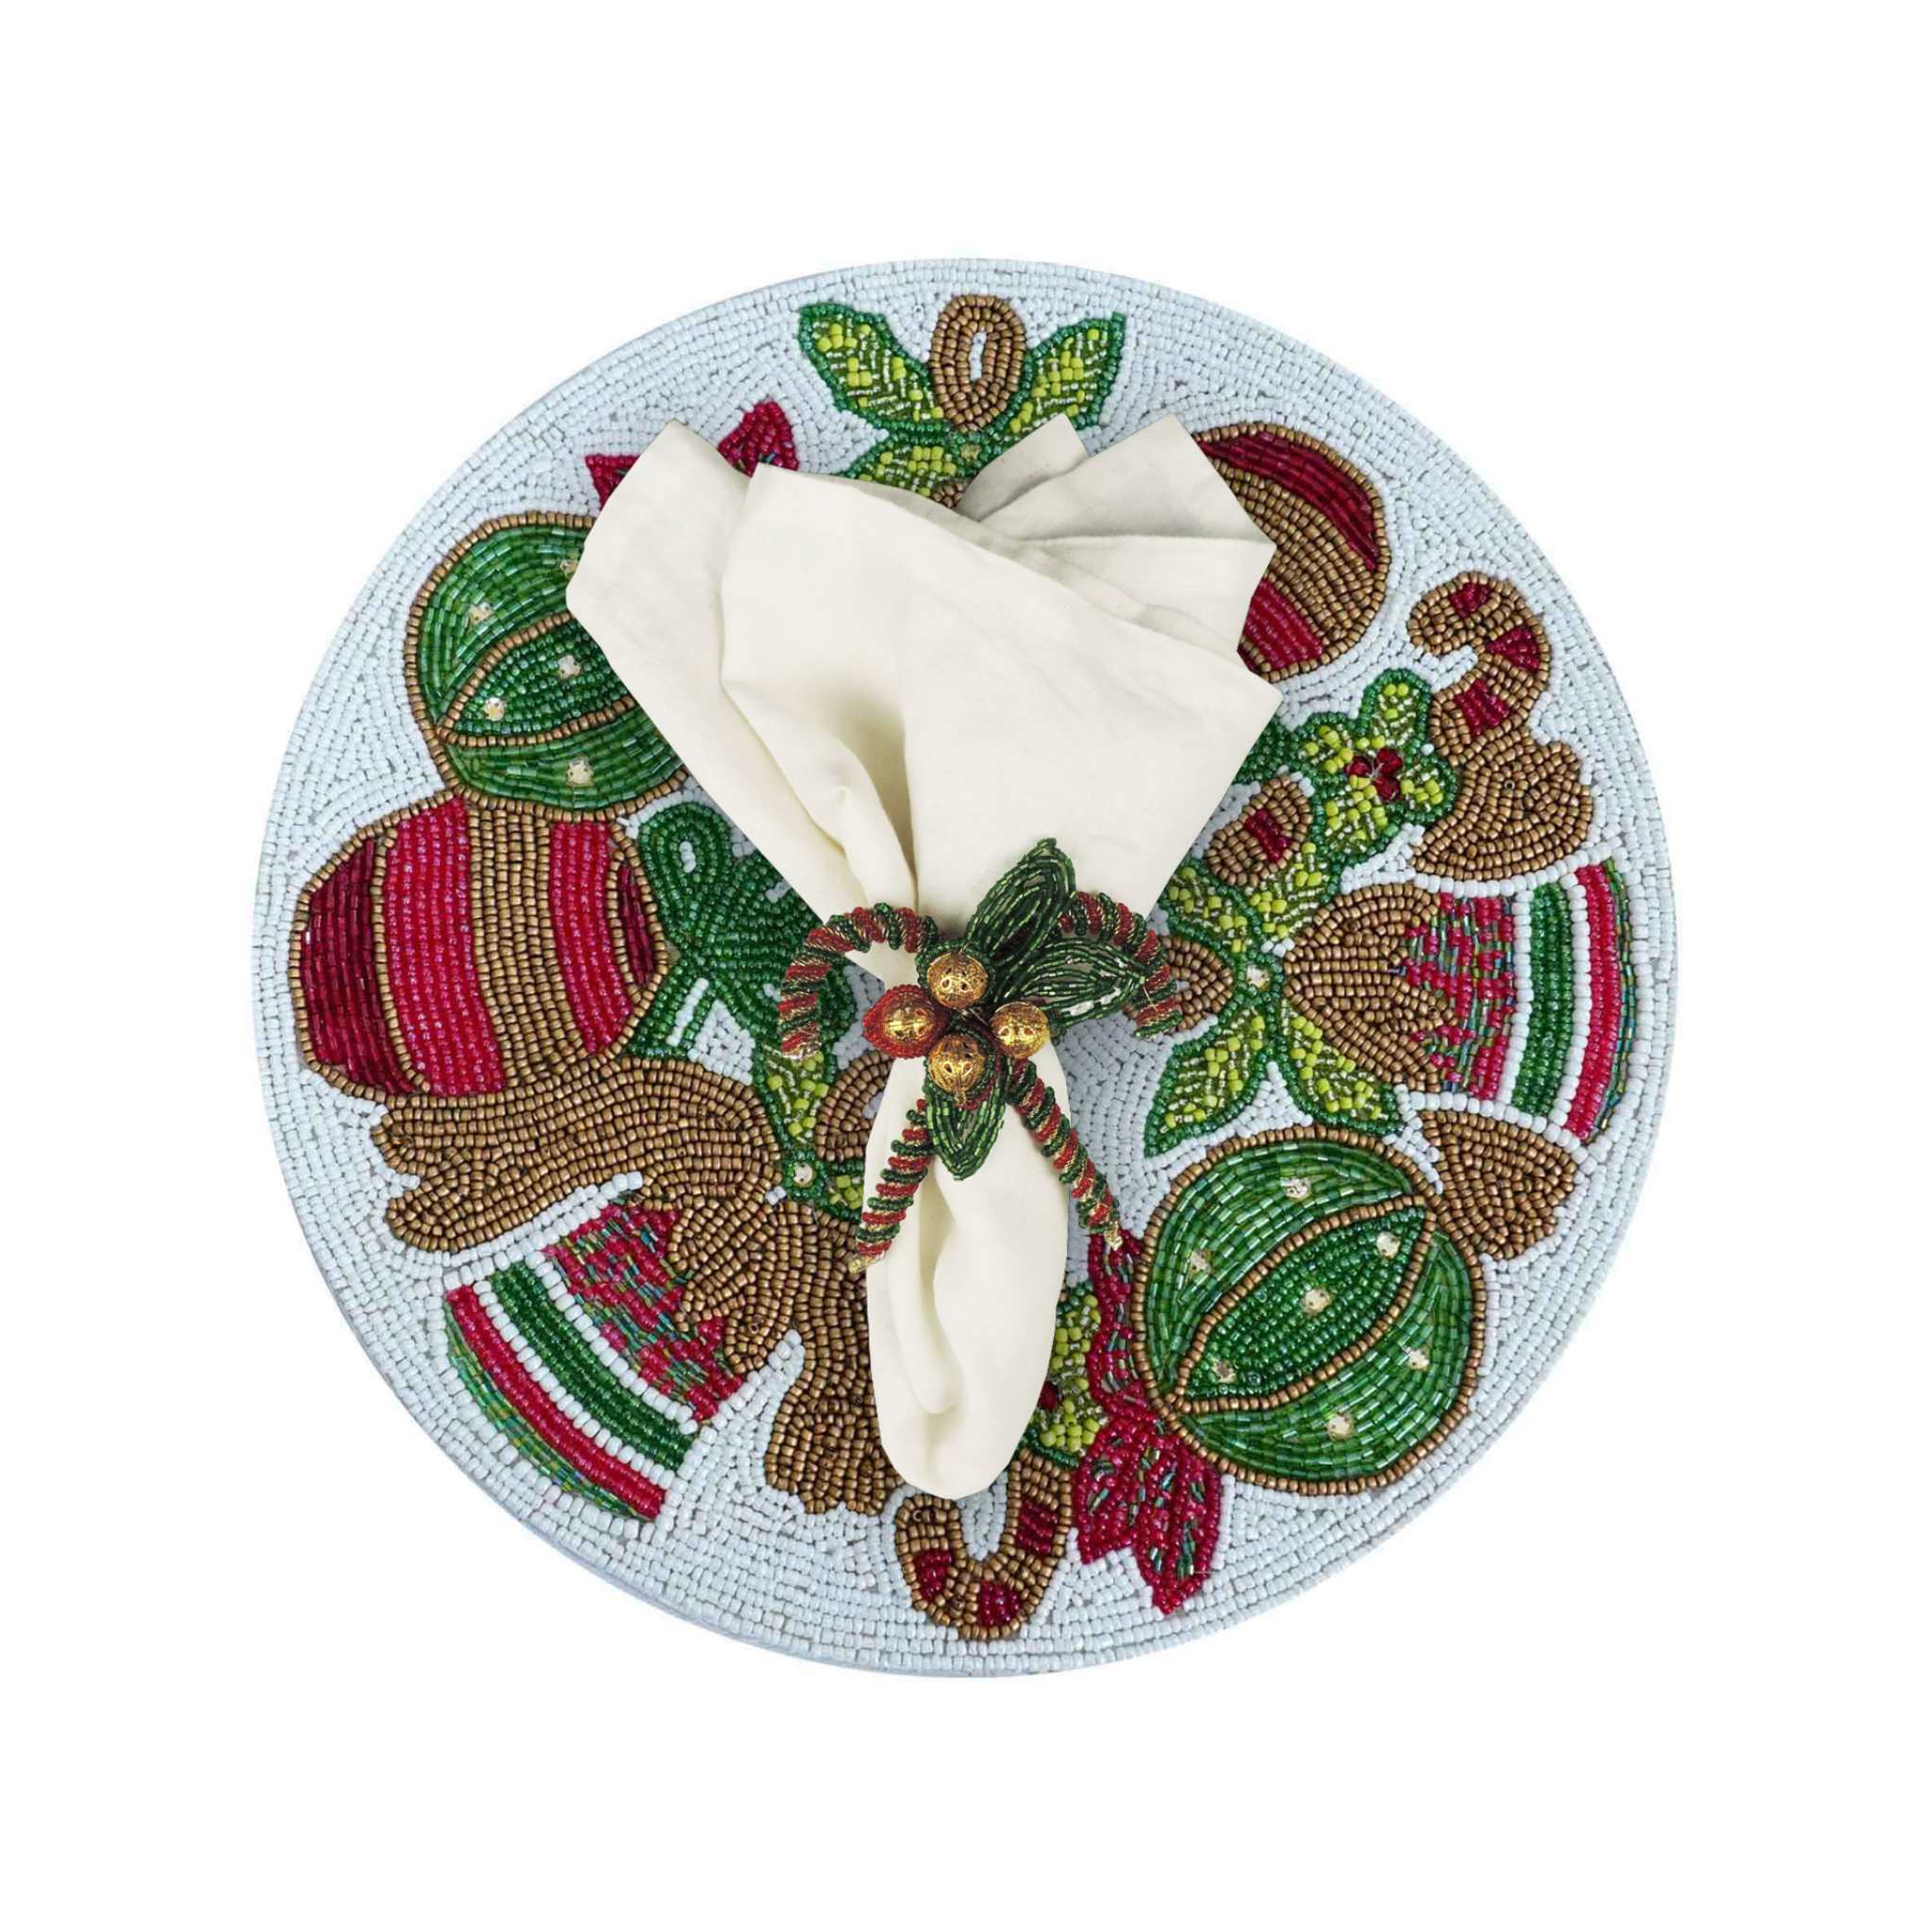 Jingle Balls Bead Table Setting for 4 - Embroidered Holiday Placemats, Napkin Rings & Table Runner in White & Red